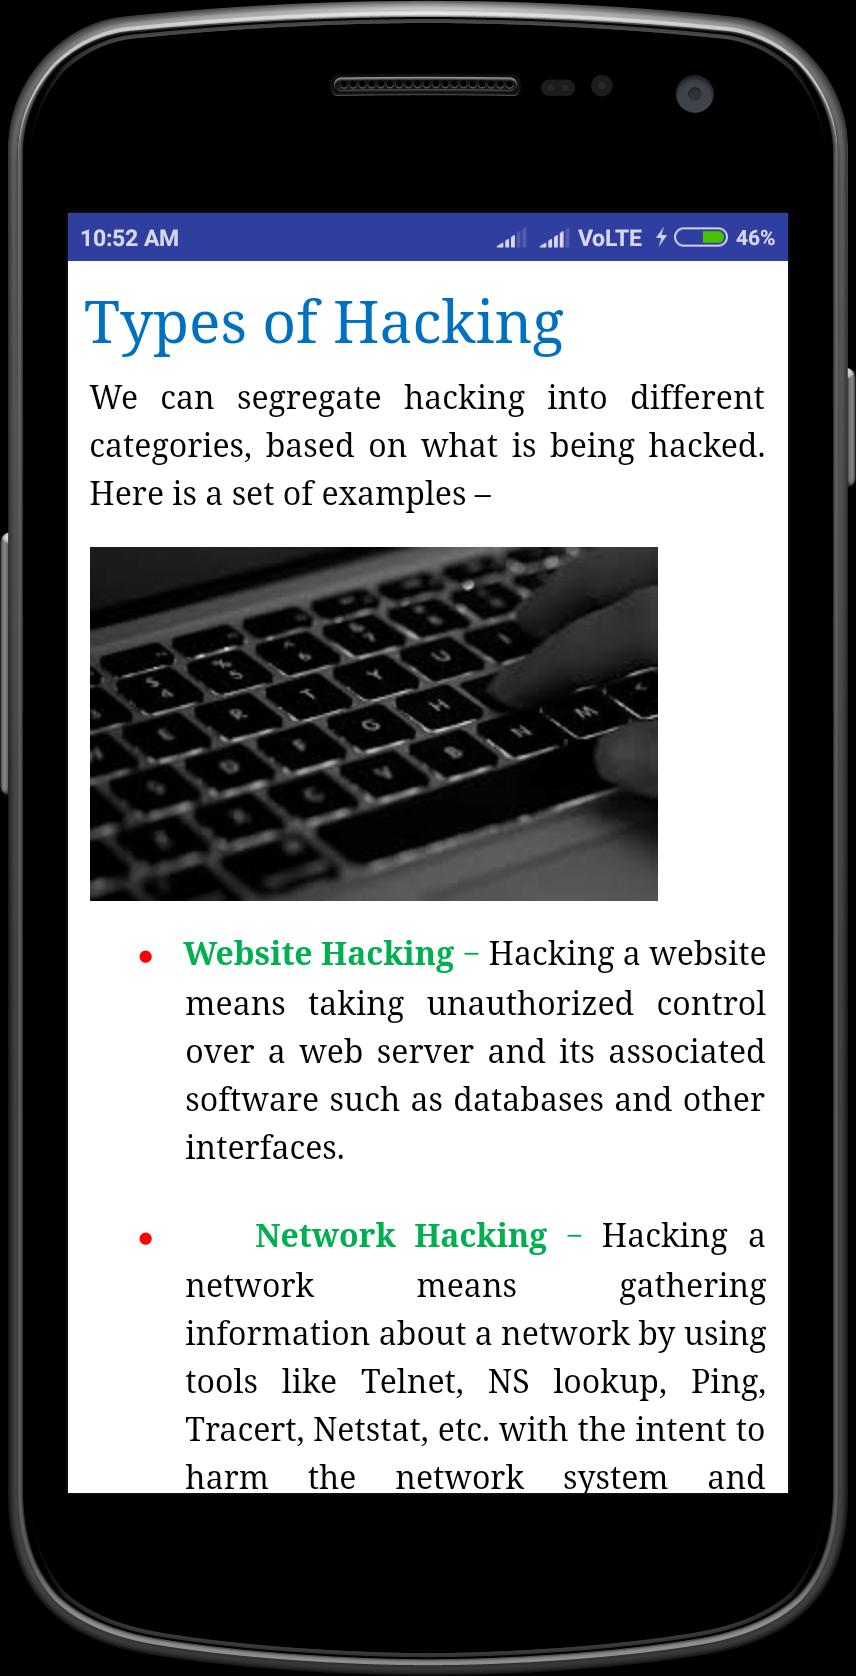 Ethical Hacking for Android - APK Download - 